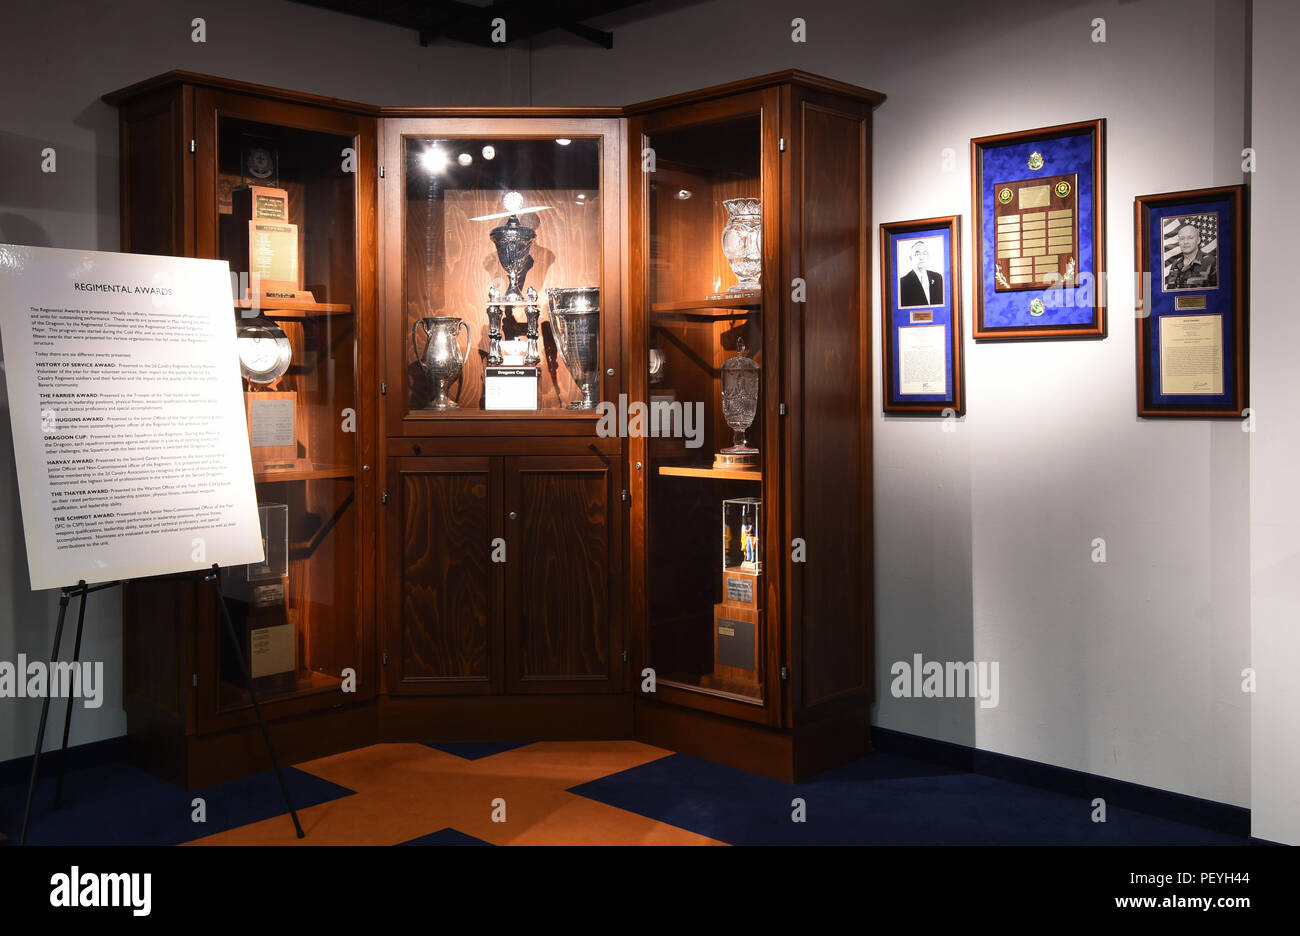 The image shows the display cabinet which holds the Regimental Awards of the 2nd Cavalry Regiment in the unit’s Reed Museum, located on Rose Barracks, Vilseck, Germany, Feb. 11, 2016. The Reed Museum collects, preserves and exhibits historically significant objects related to the history of the Second Regiment of Dragoons, from 1836 to the present. (U.S. Army photo by Visual Information Specialist Gertrud Zach/released) Stock Photo